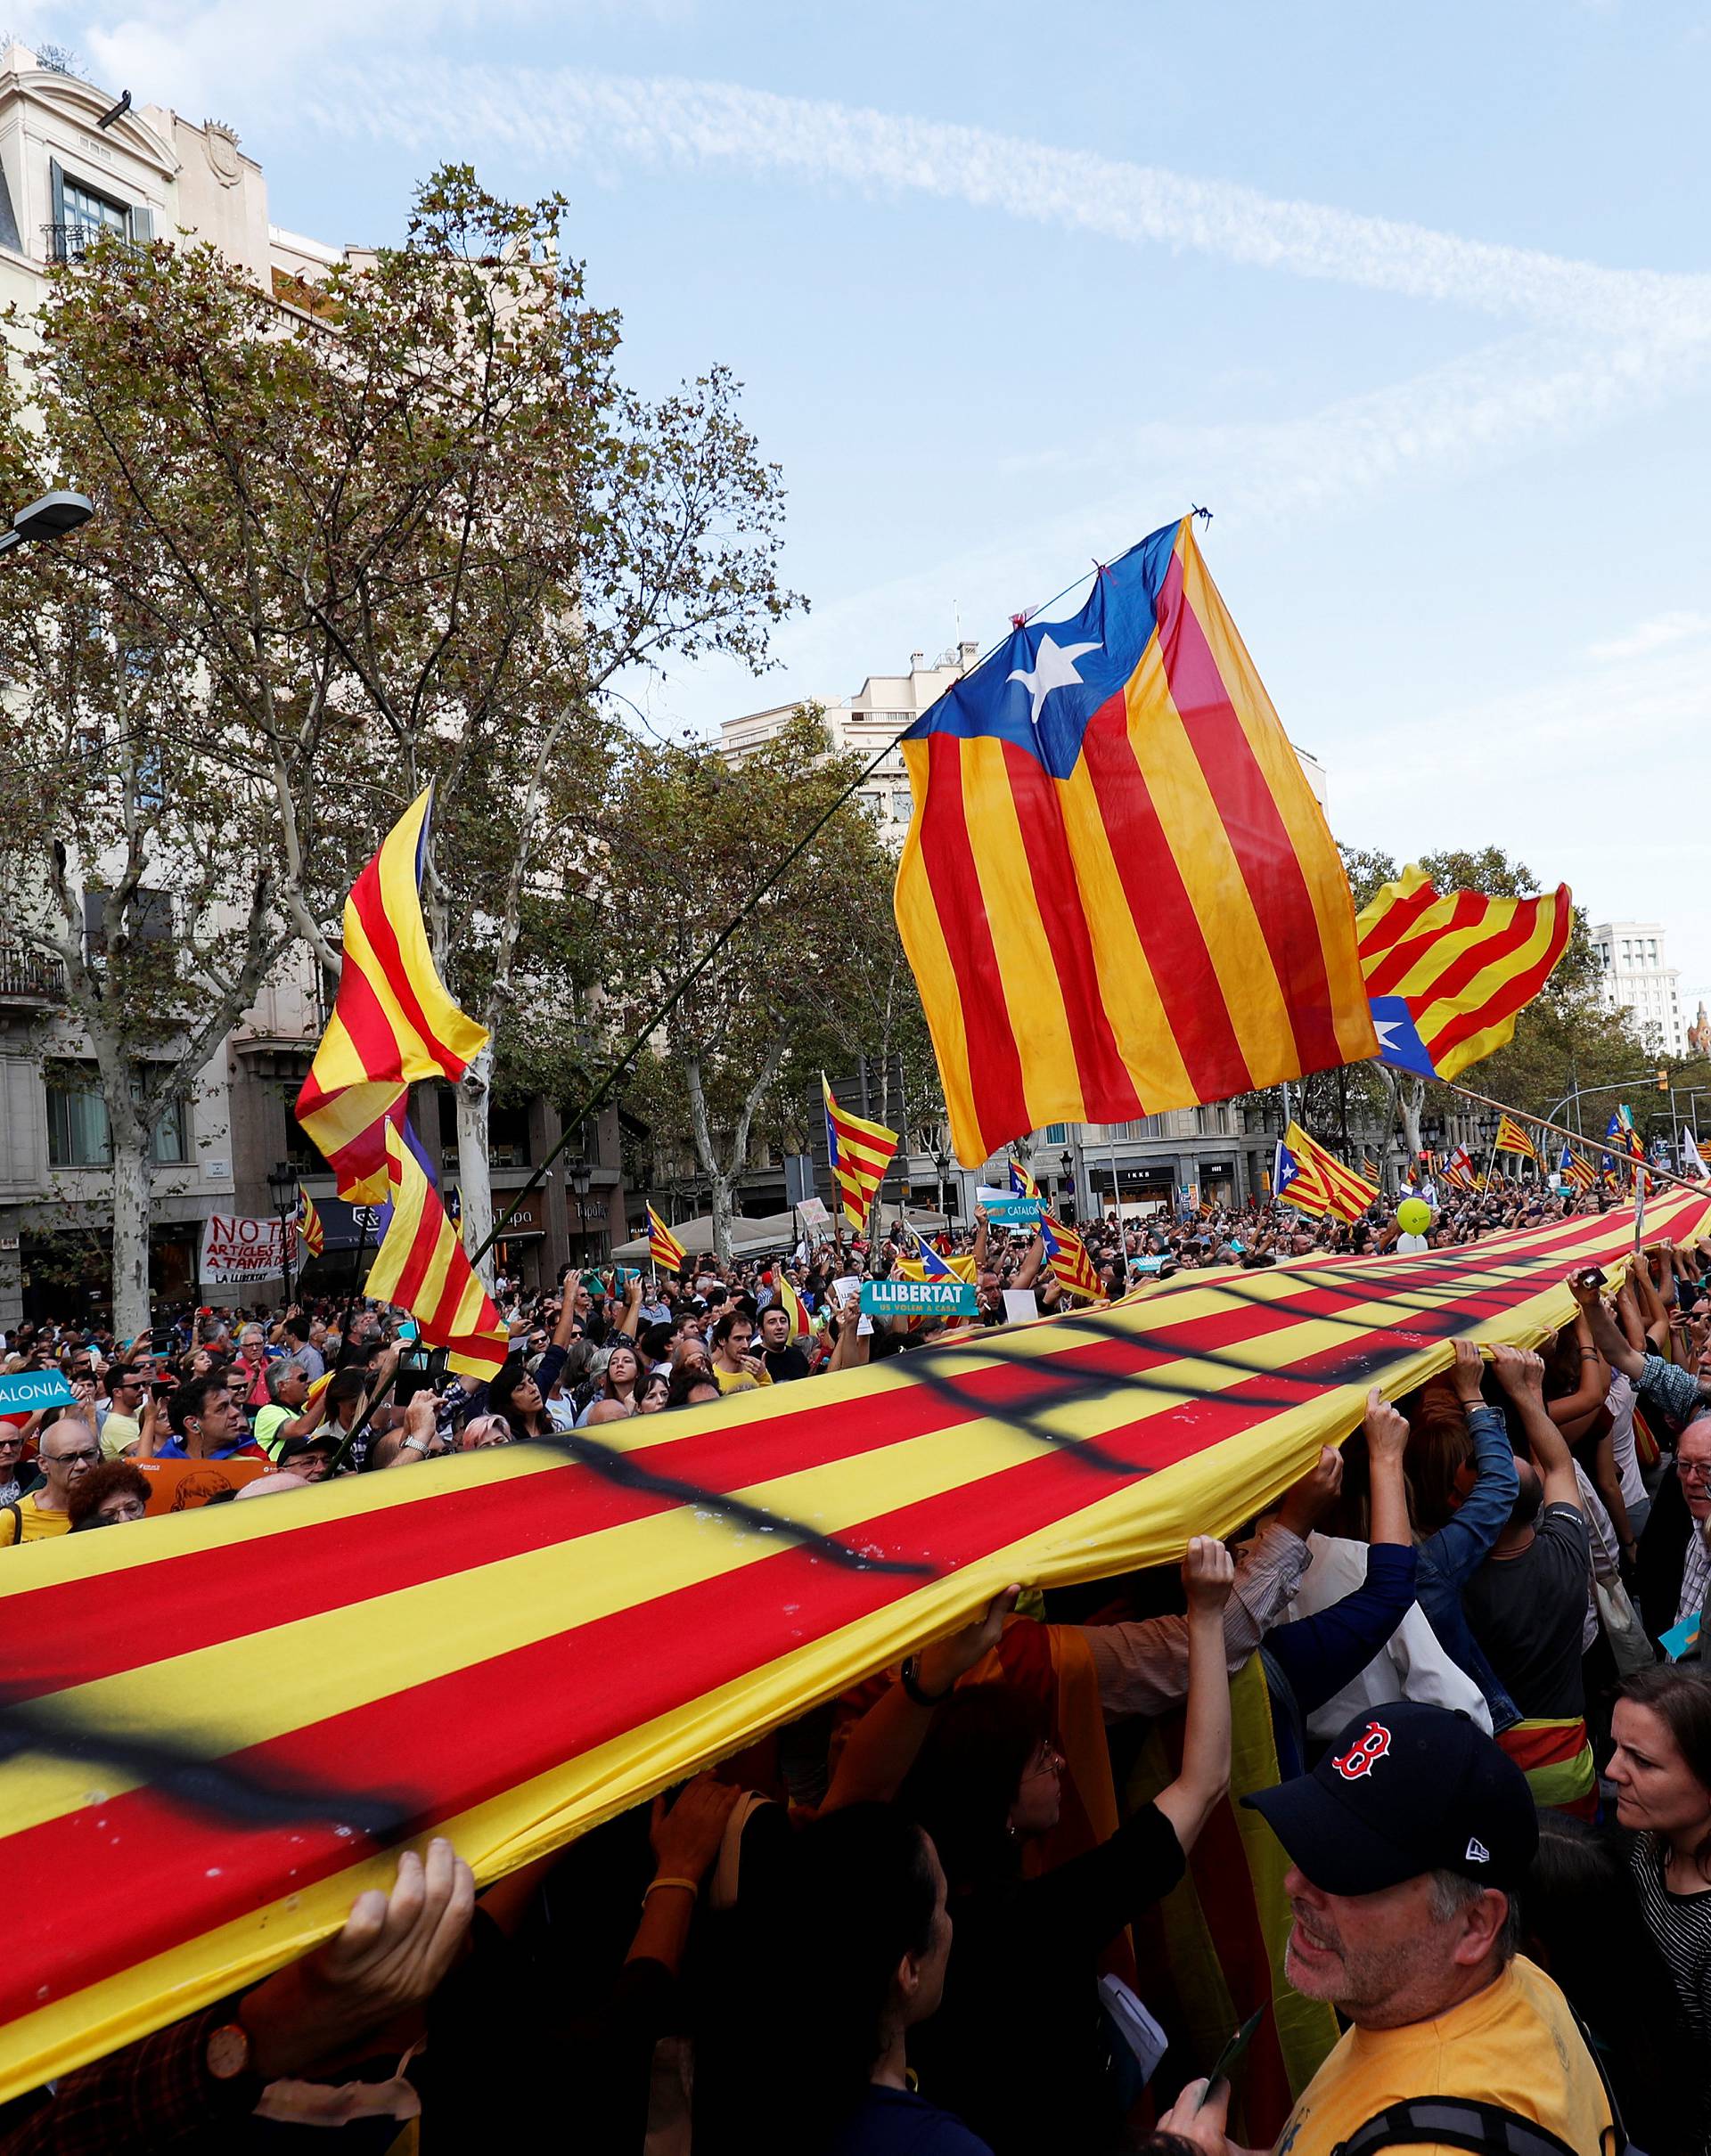 People wave separatist Catalan flags during a demonstration organised by Catalan pro-independence movements ANC (Catalan National Assembly) and Omnium Cutural, following the imprisonment of their two leaders, in